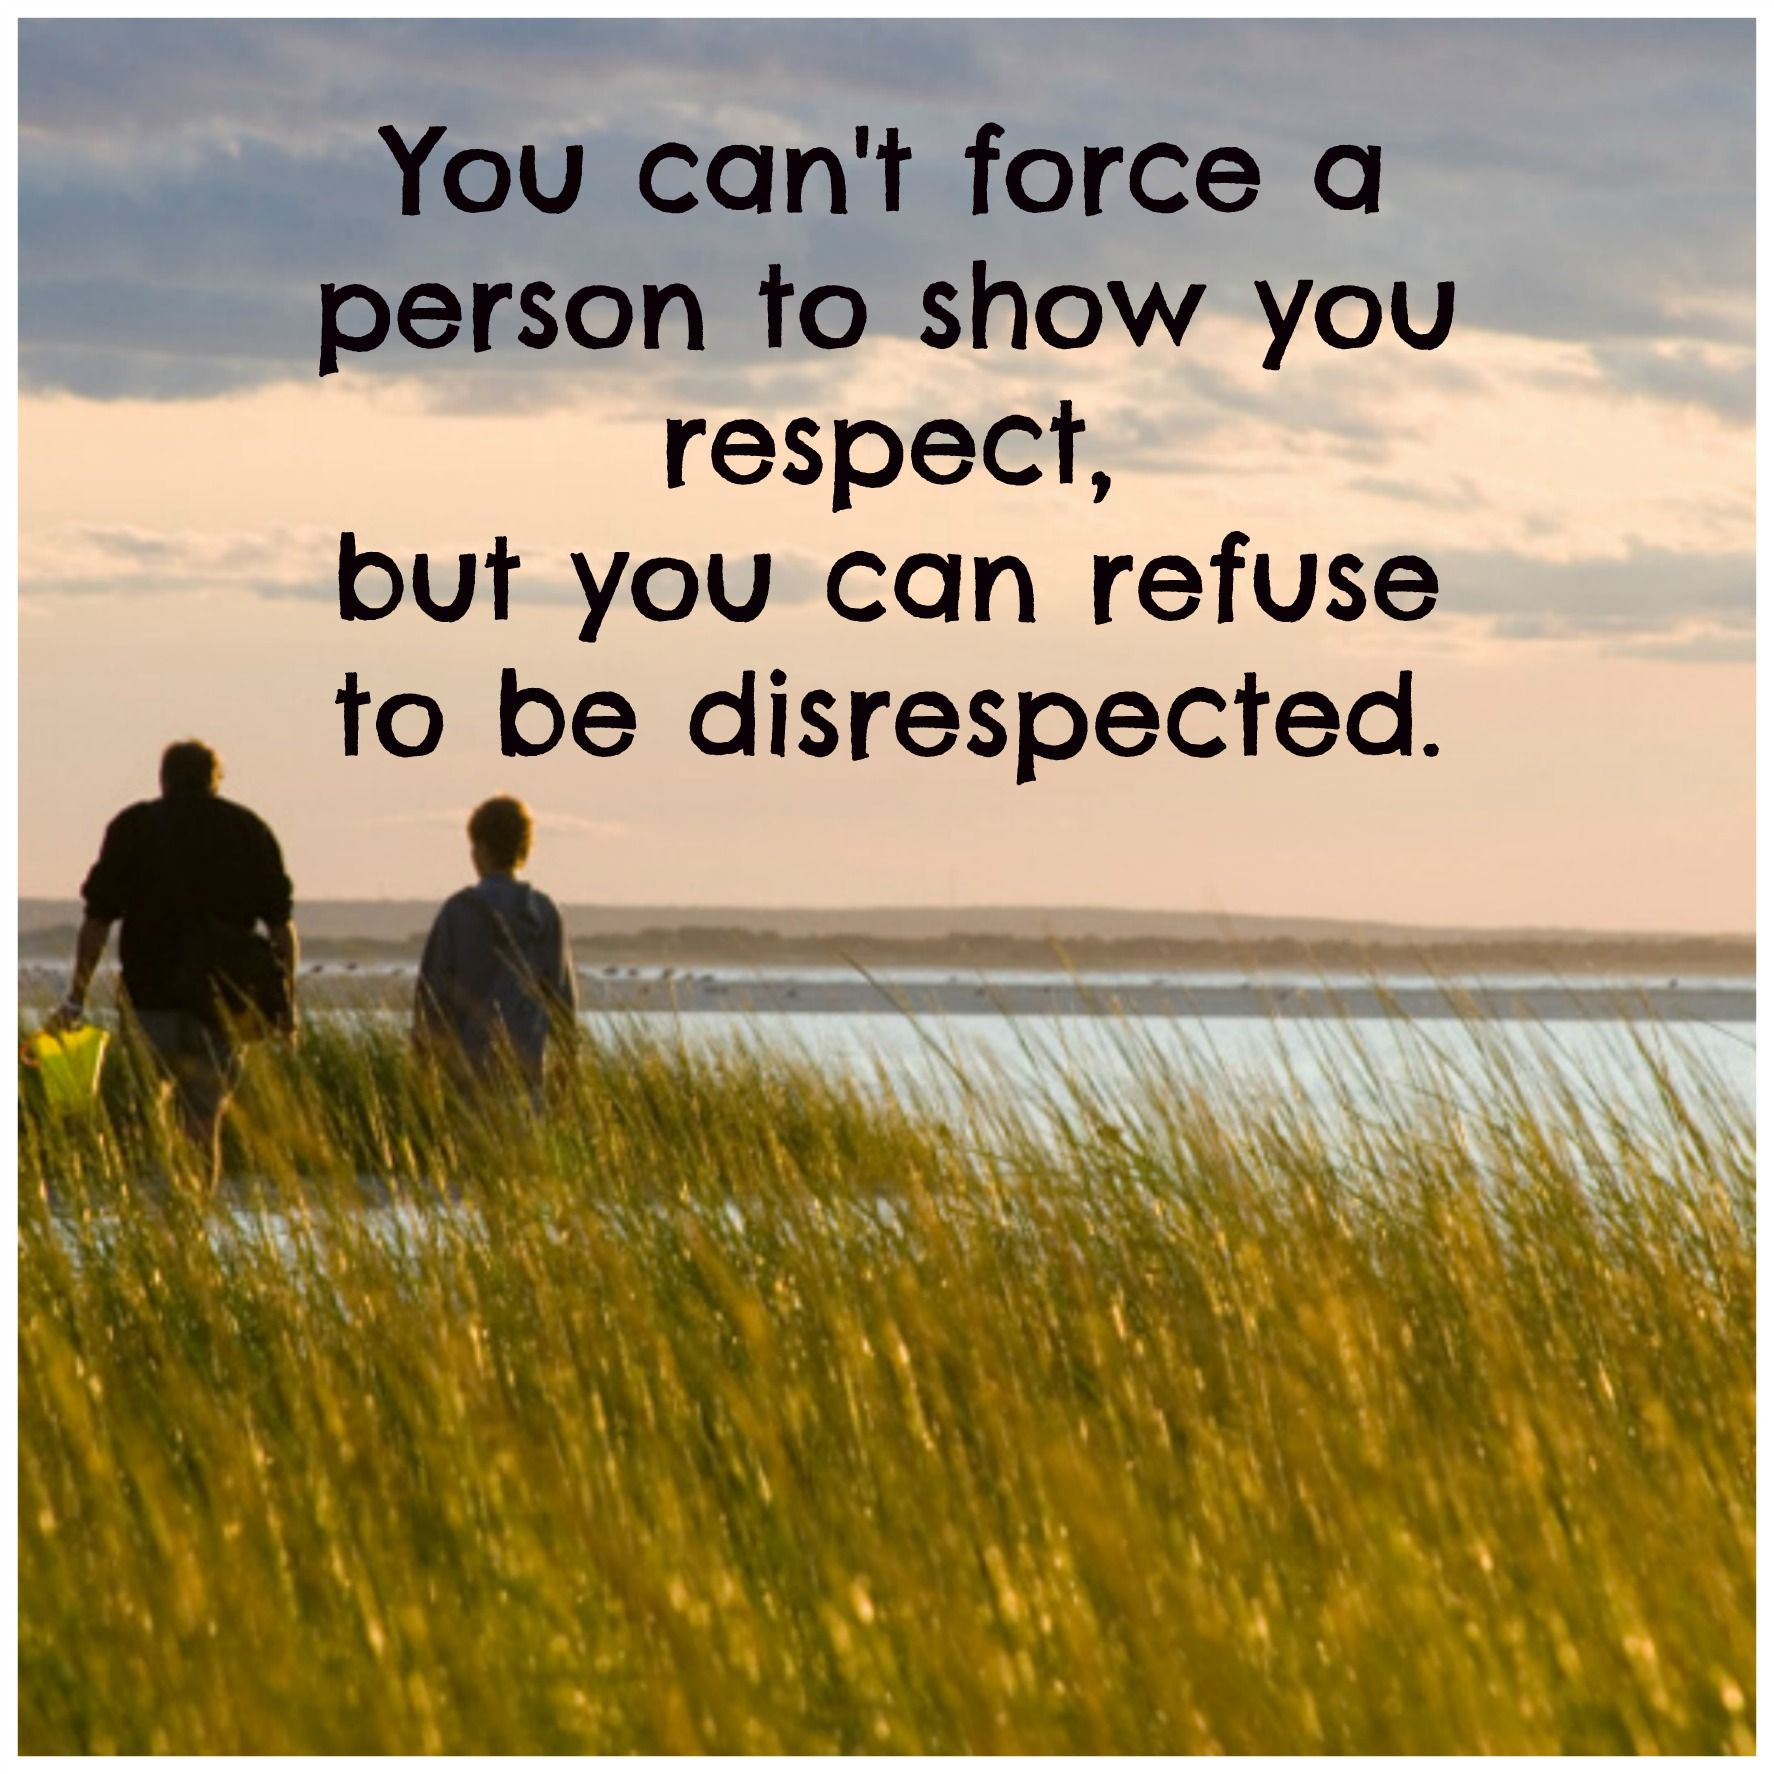 Quotes About Disrespecting Your Mother
 Disrespect Quotes on Pinterest